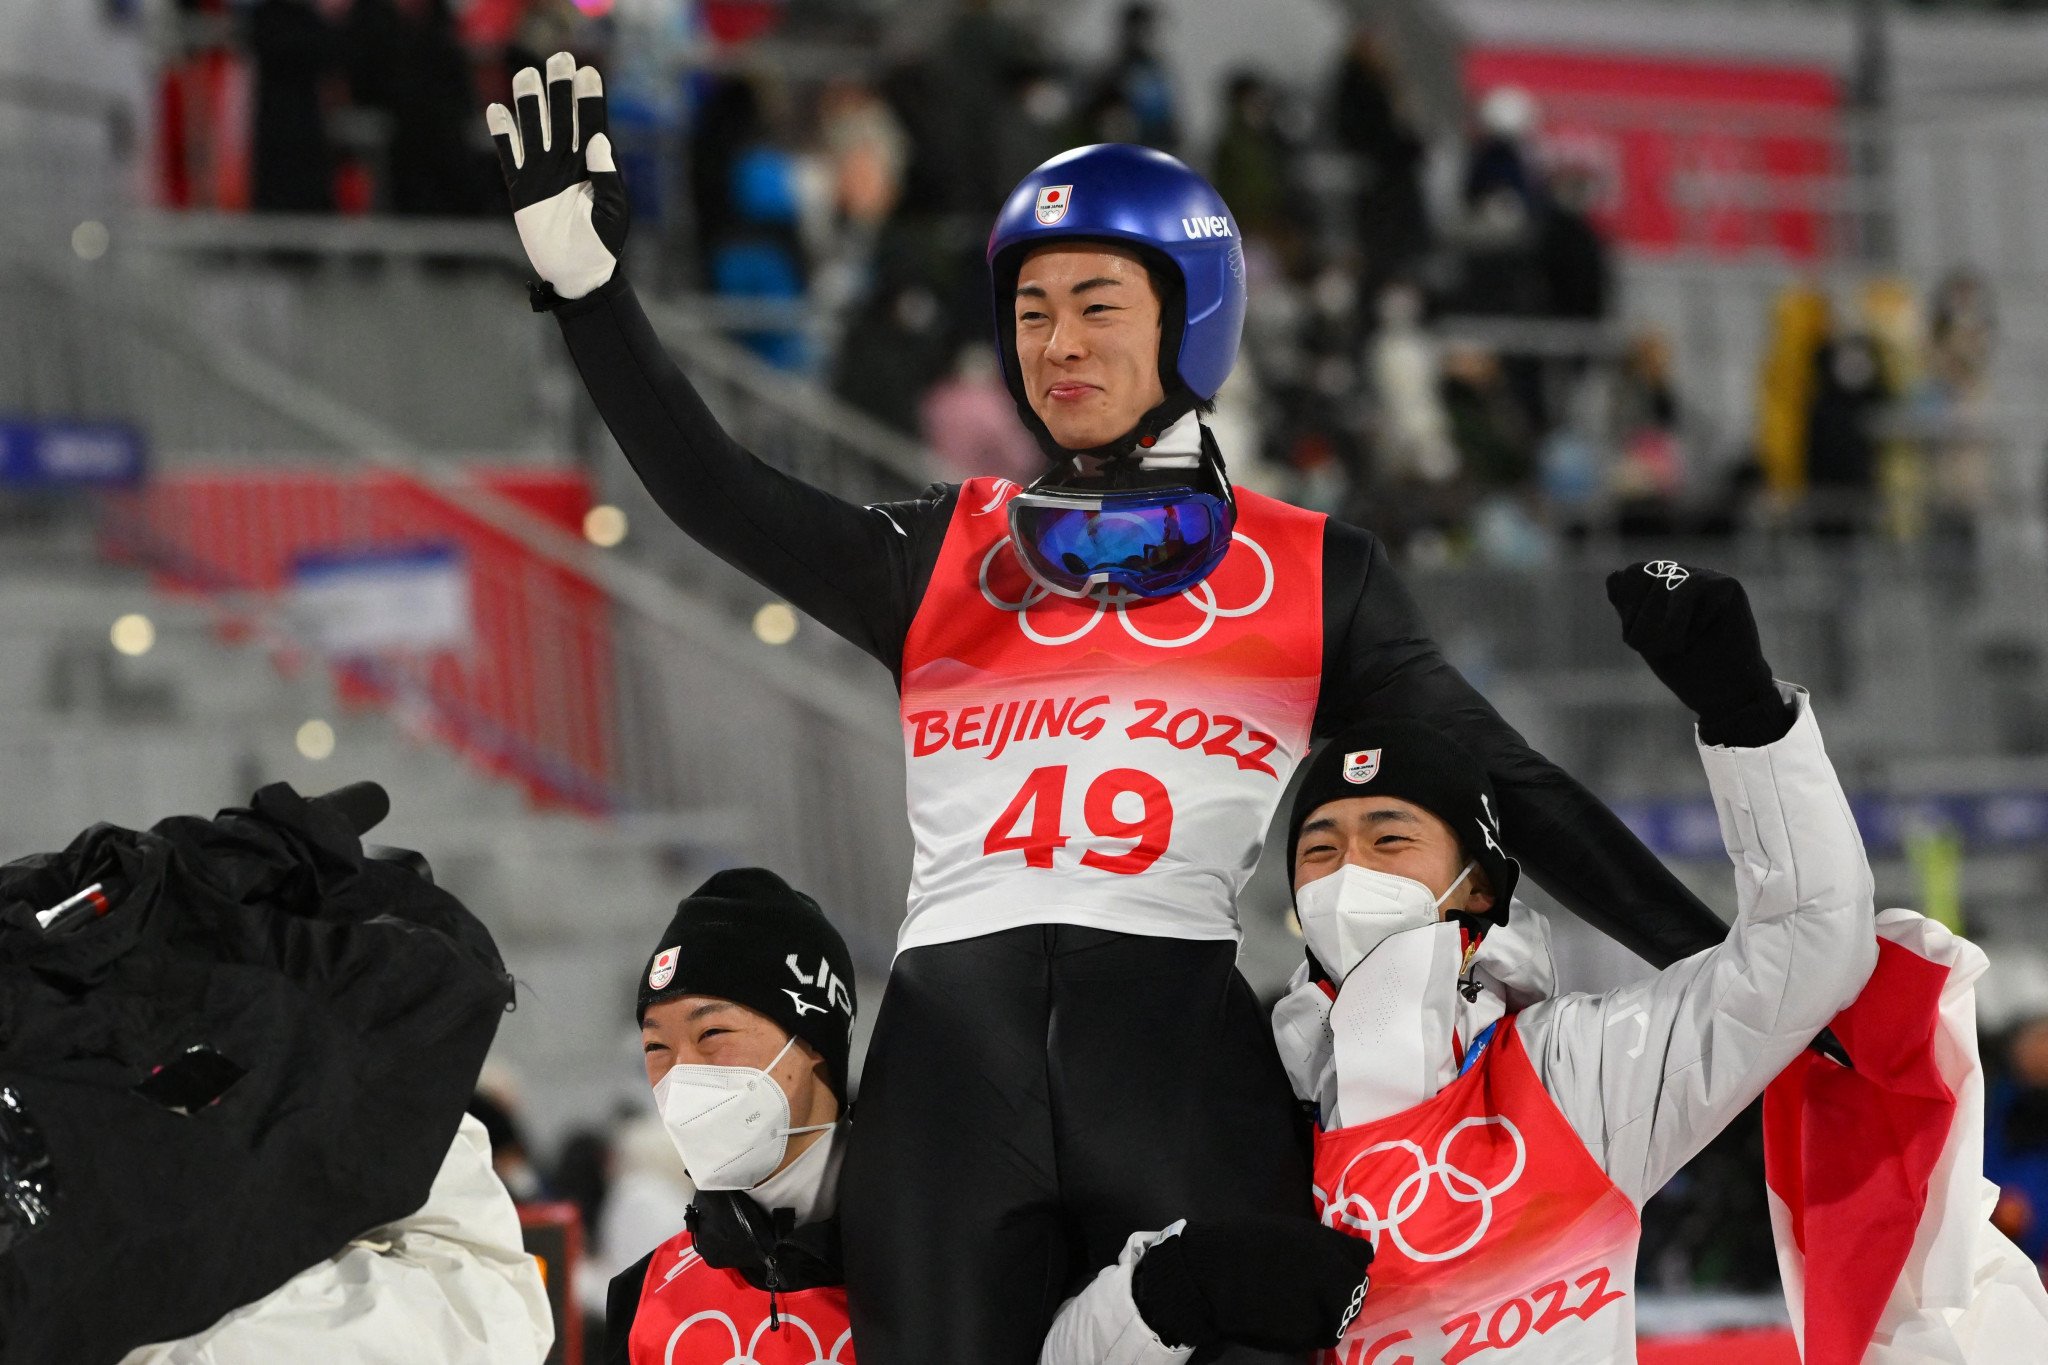 Olympic champion Kobayashi aims for grand finale at Ski Jumping World Cup in Planica